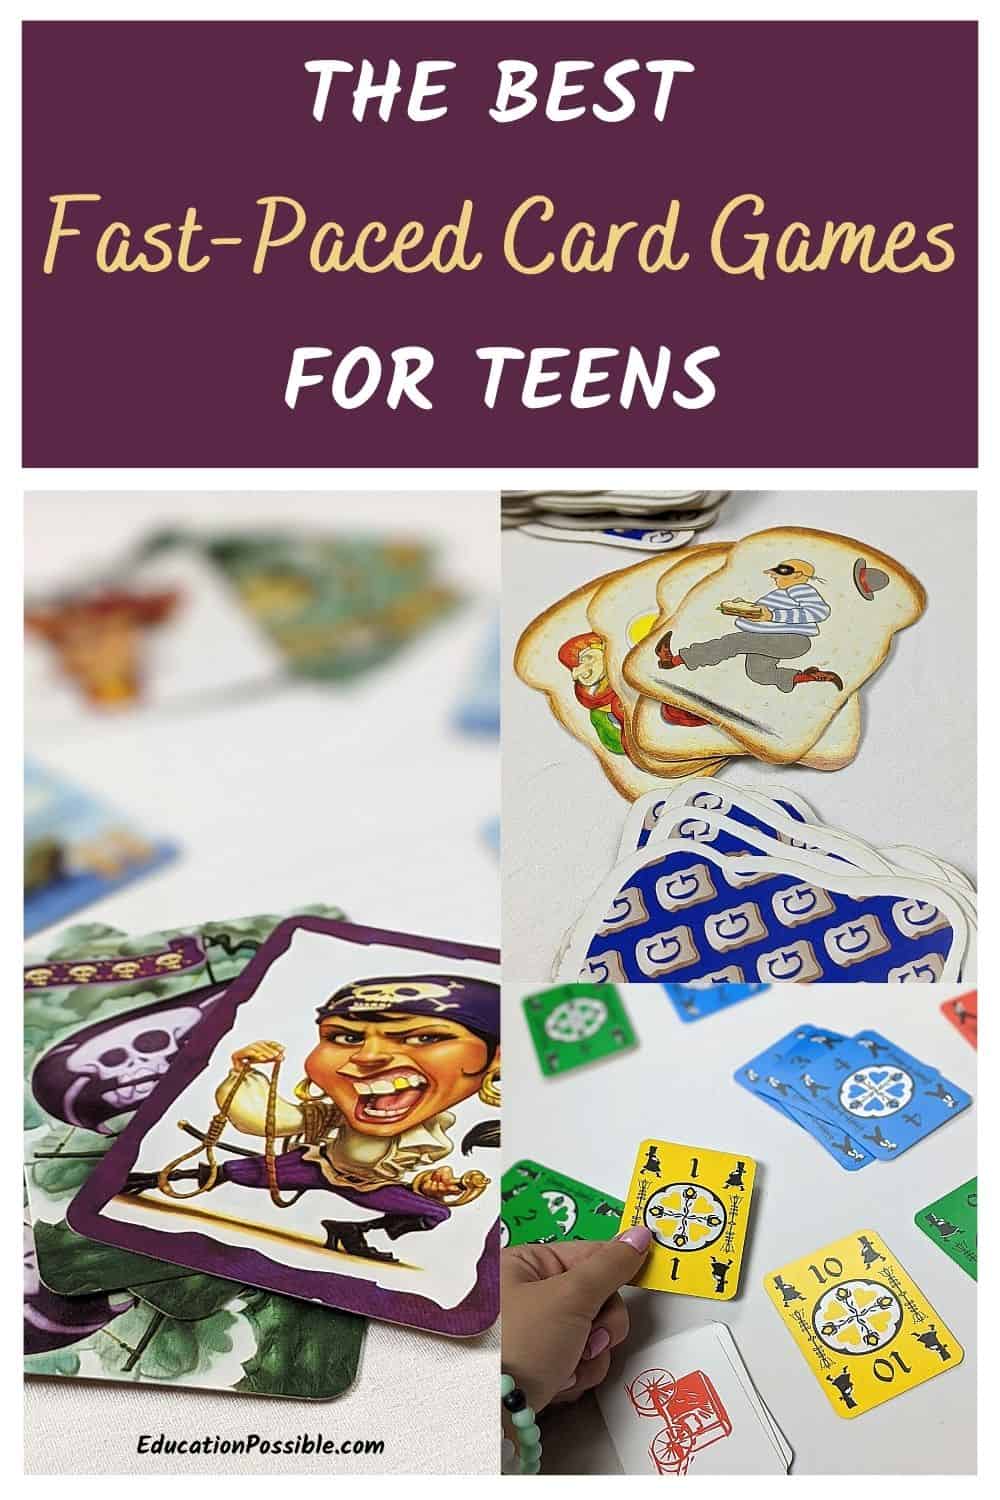 The Best Fast Paced Card Games for Teens